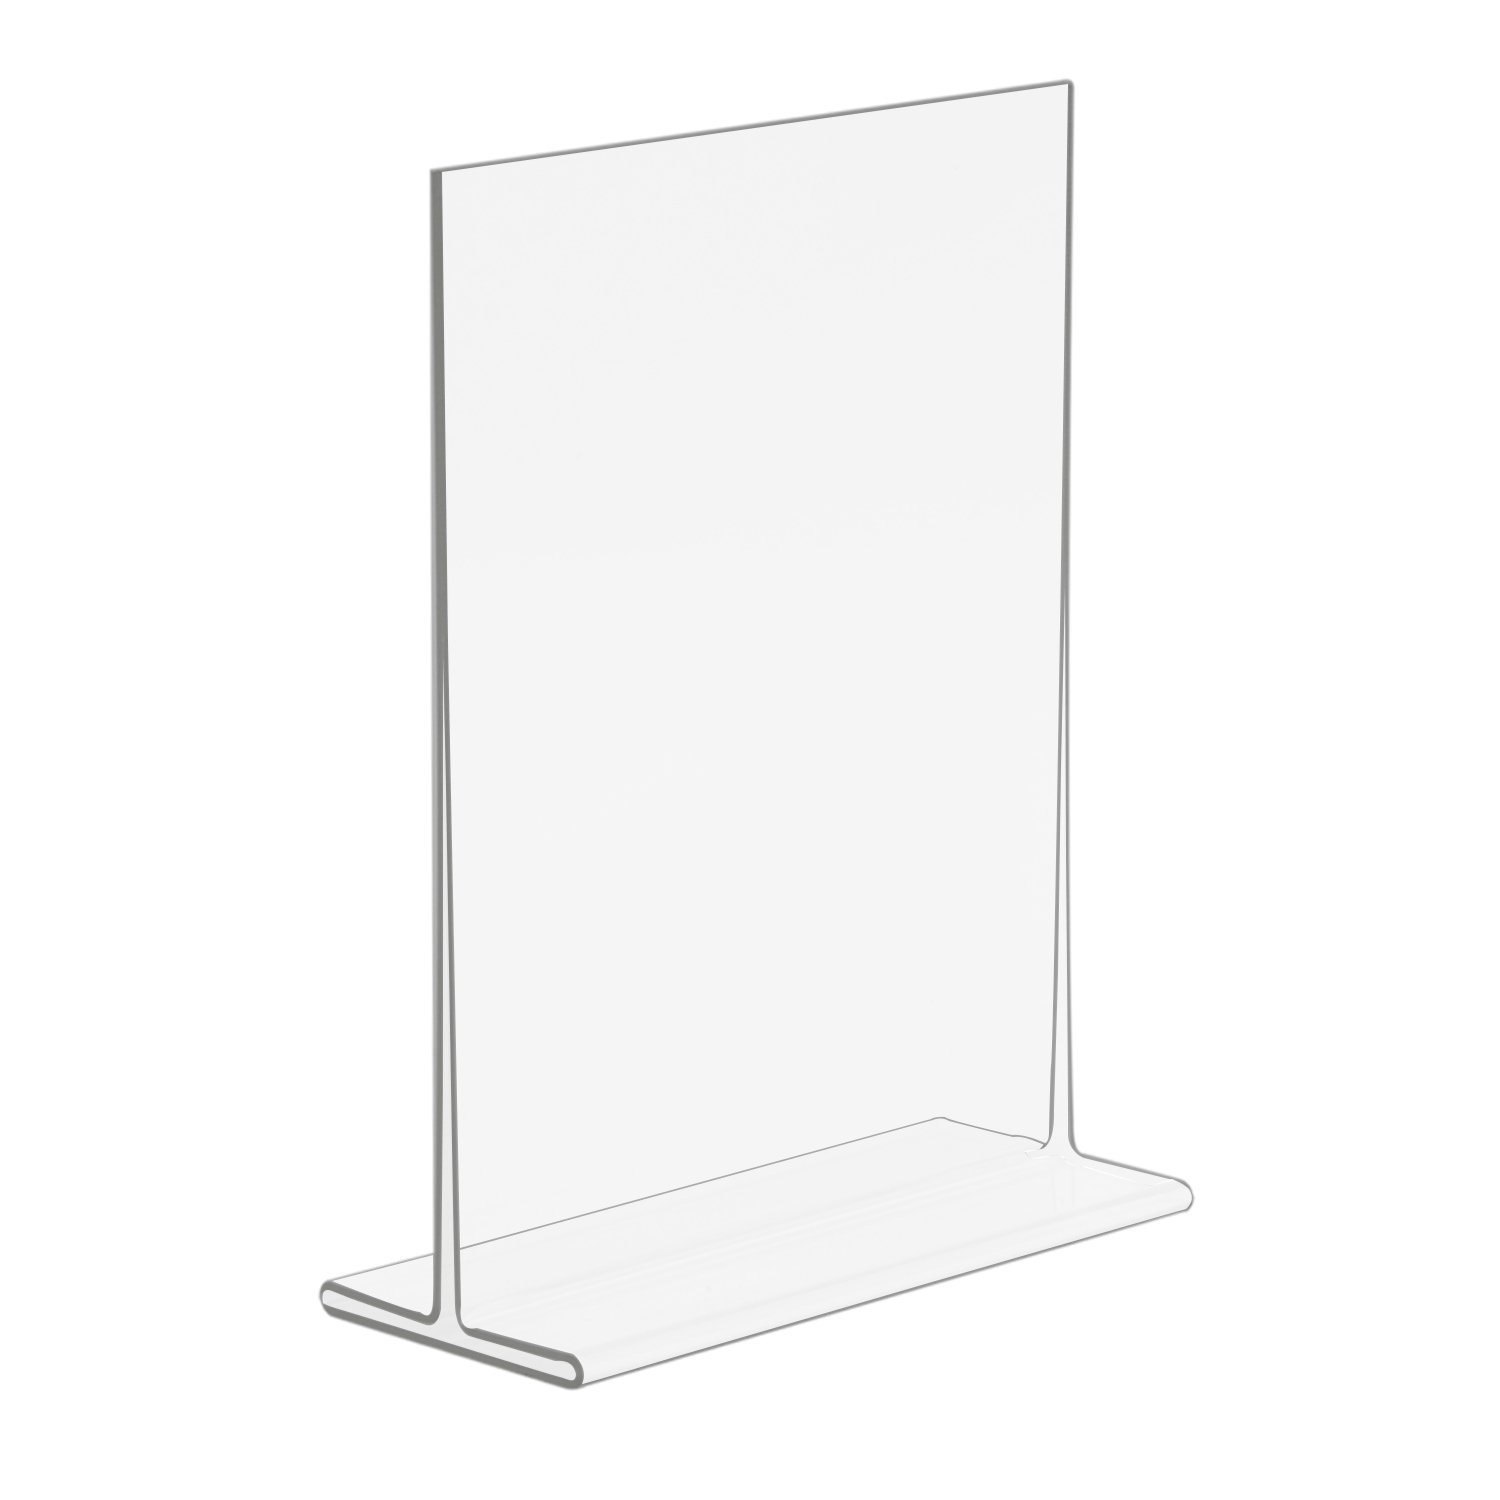 5x7 Top Loading Double Sided Acrylic Sign Holder - Buy Acrylic Displays ...